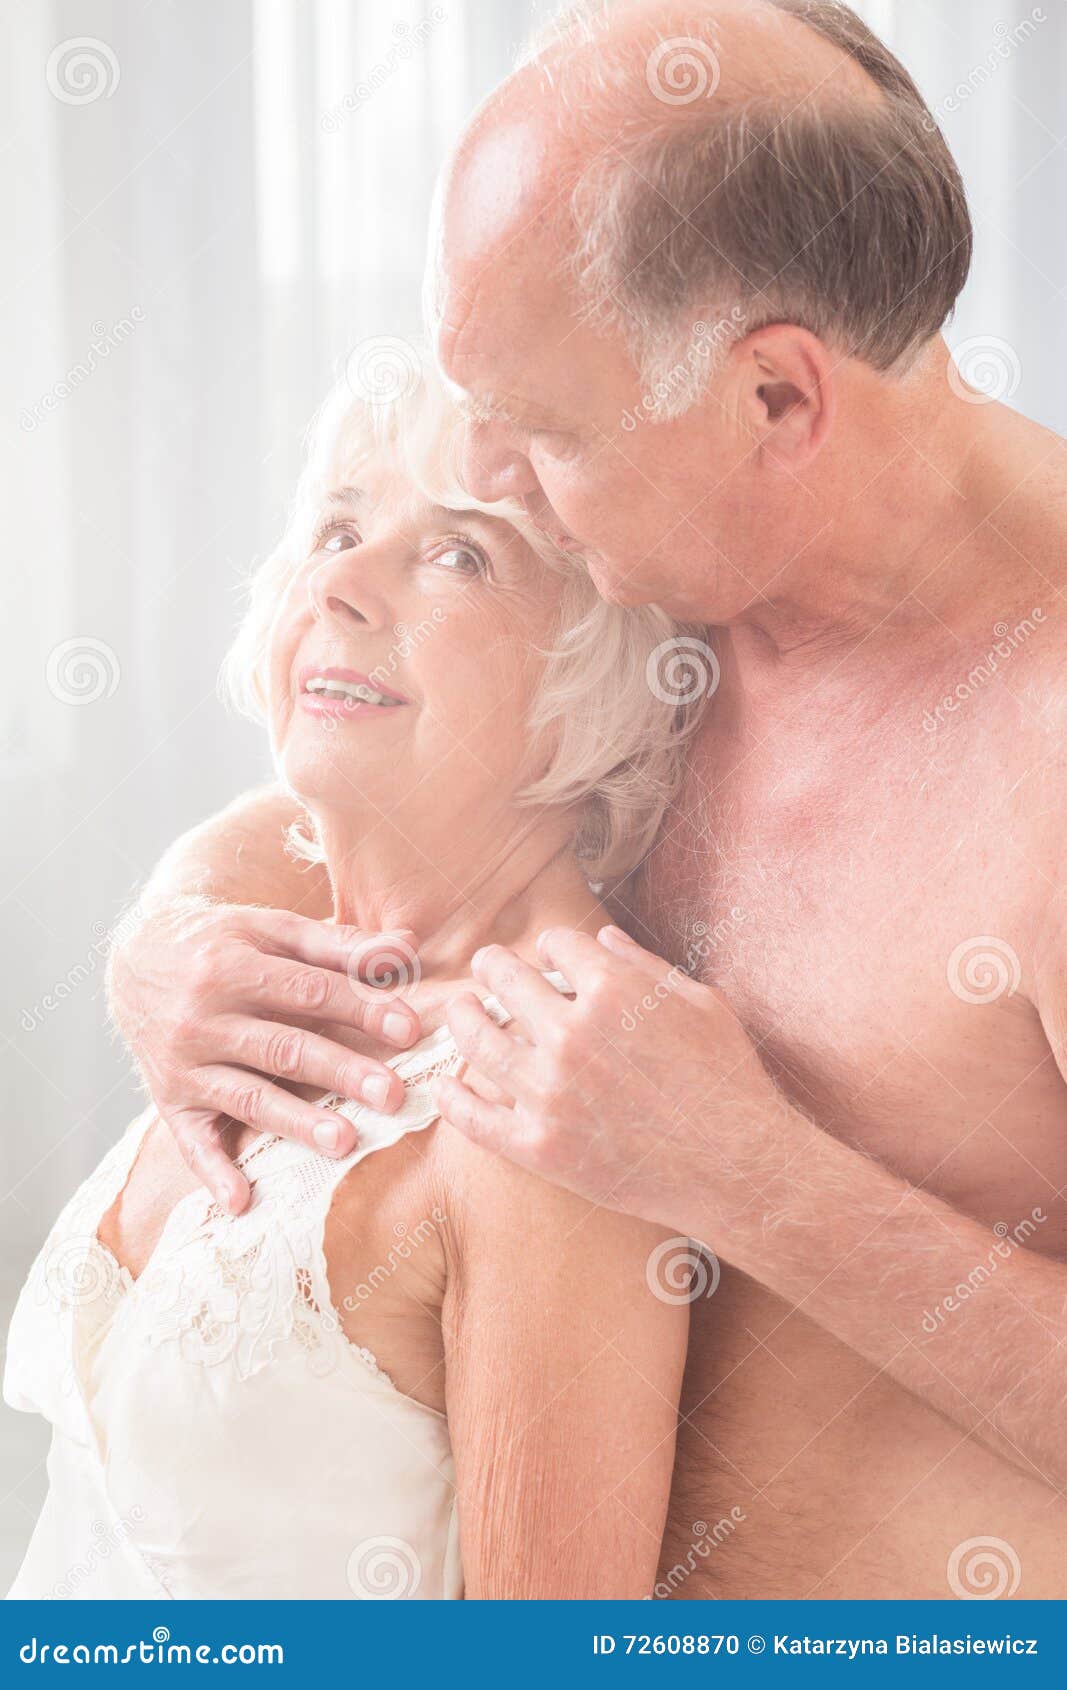 We re not too old for sex stock photo